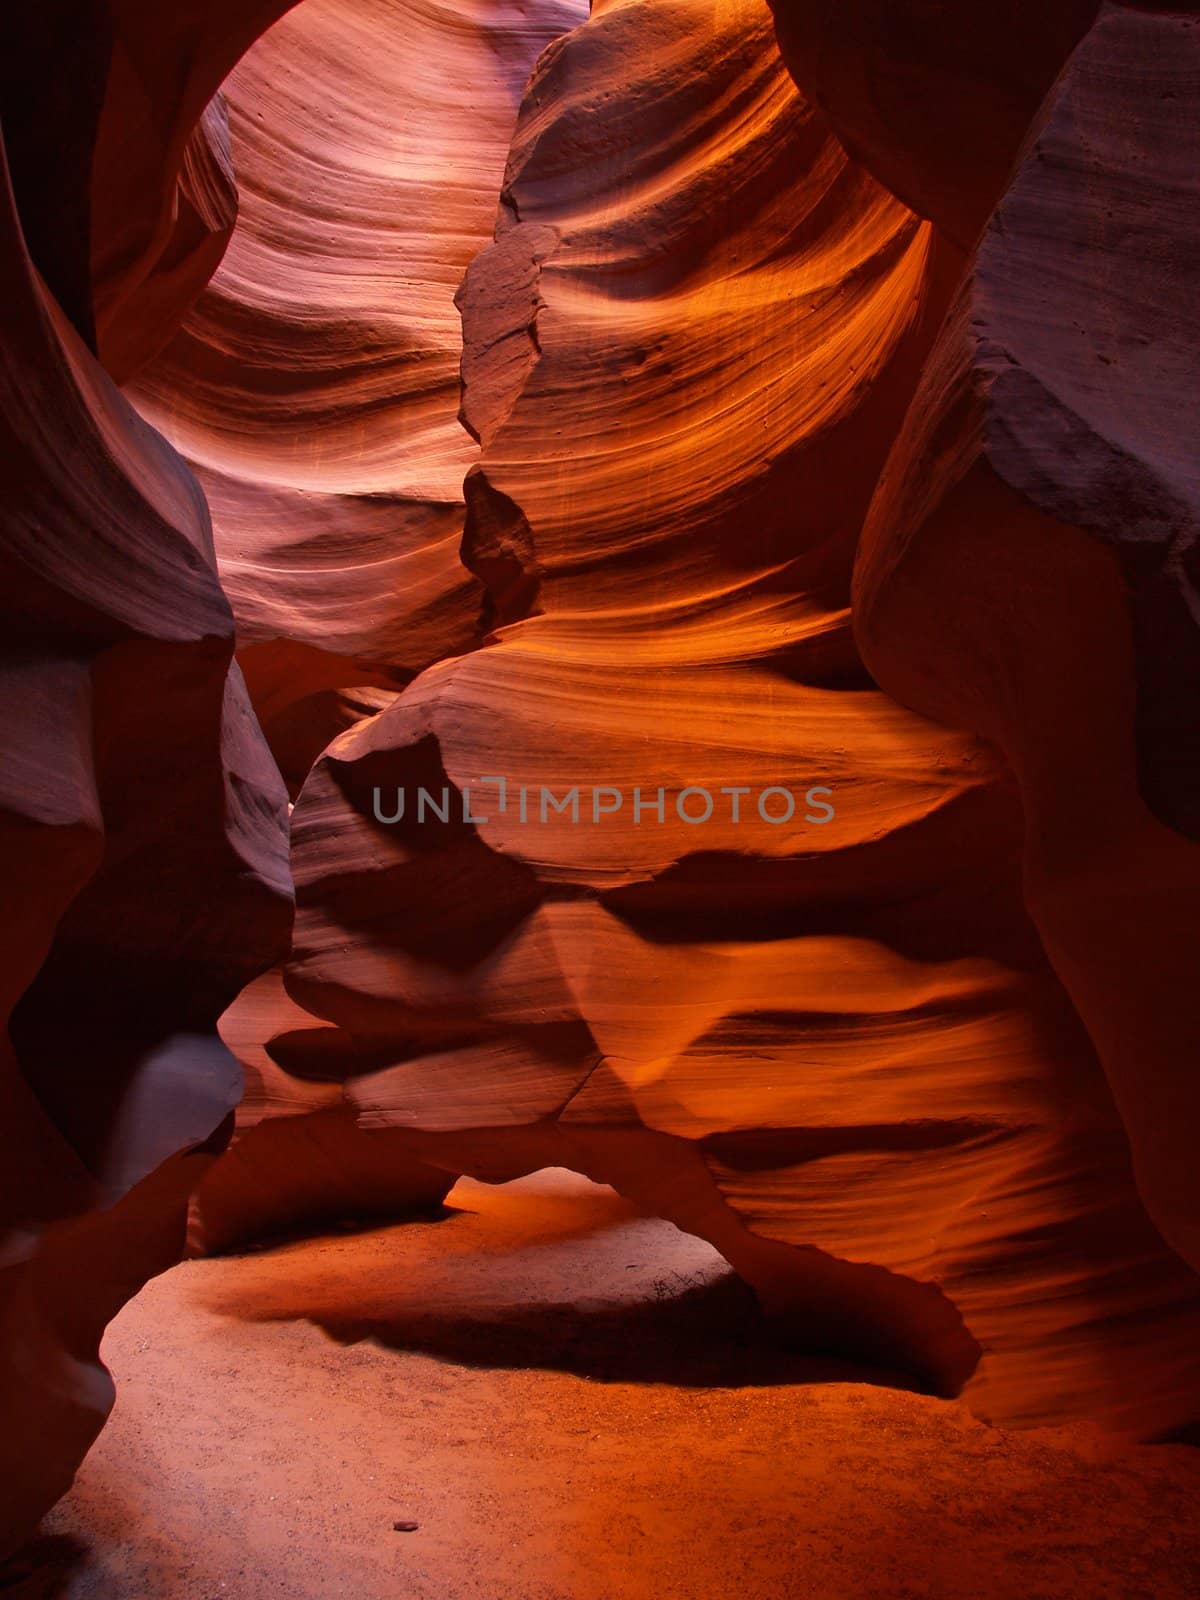 The upper Antelope Slot Canyon near Page by gary718